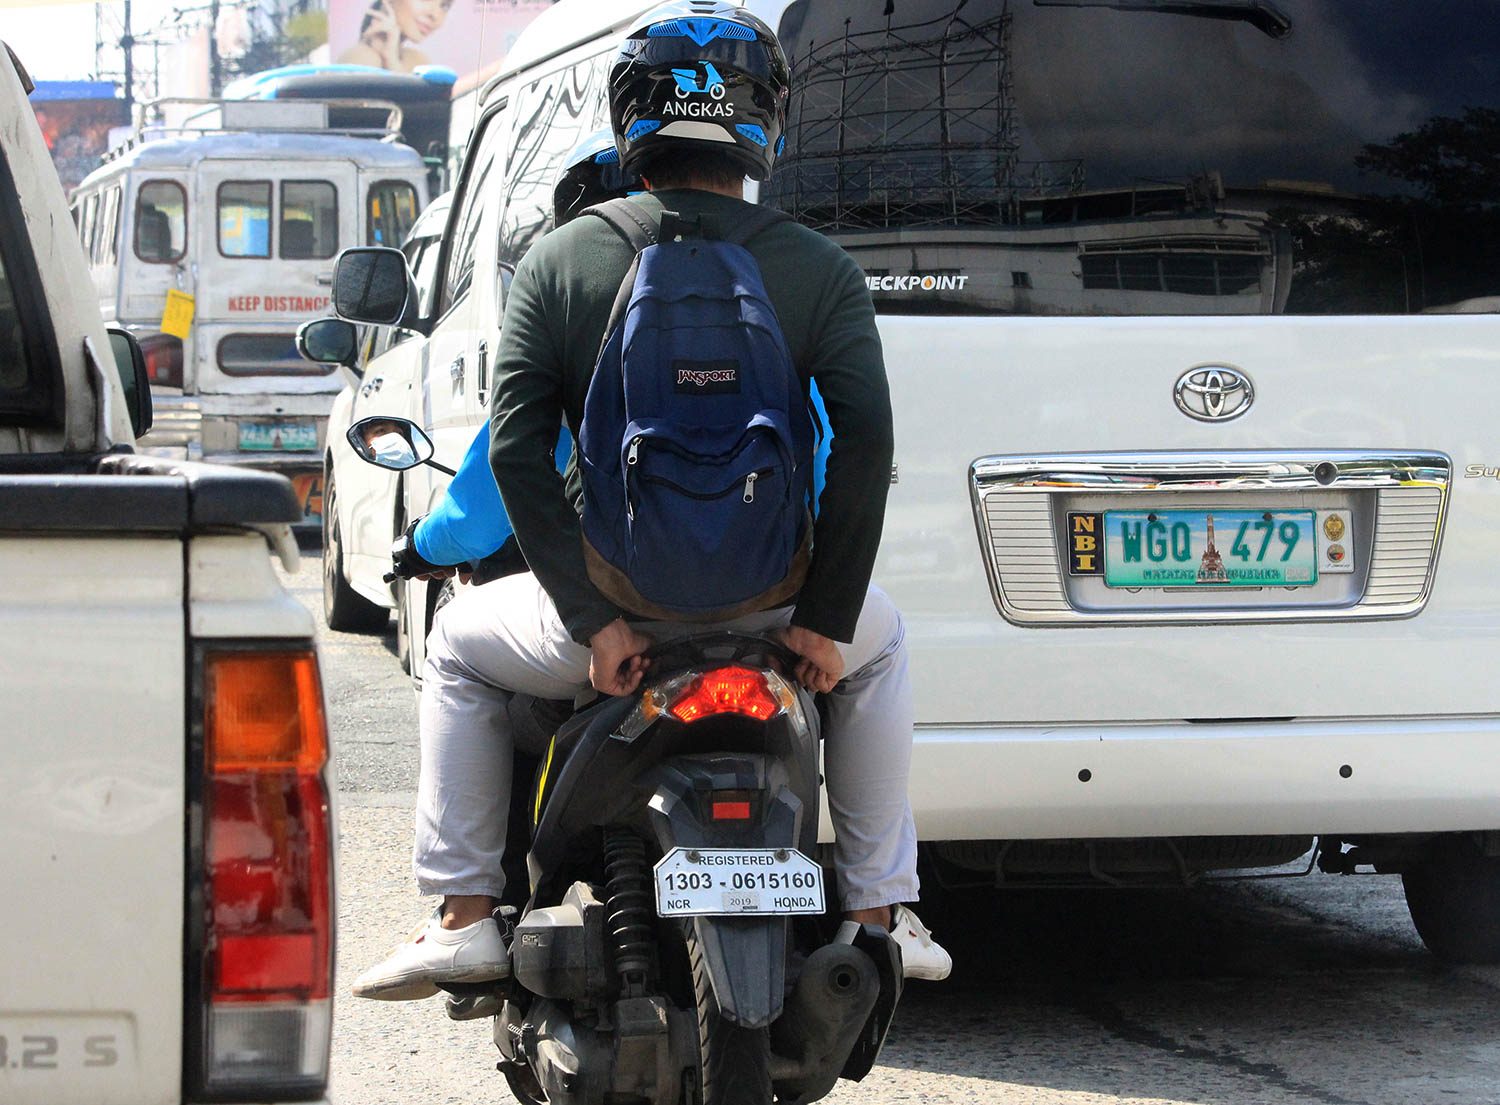 LTFRB favors extension of Angkas pilot run to accommodate new players